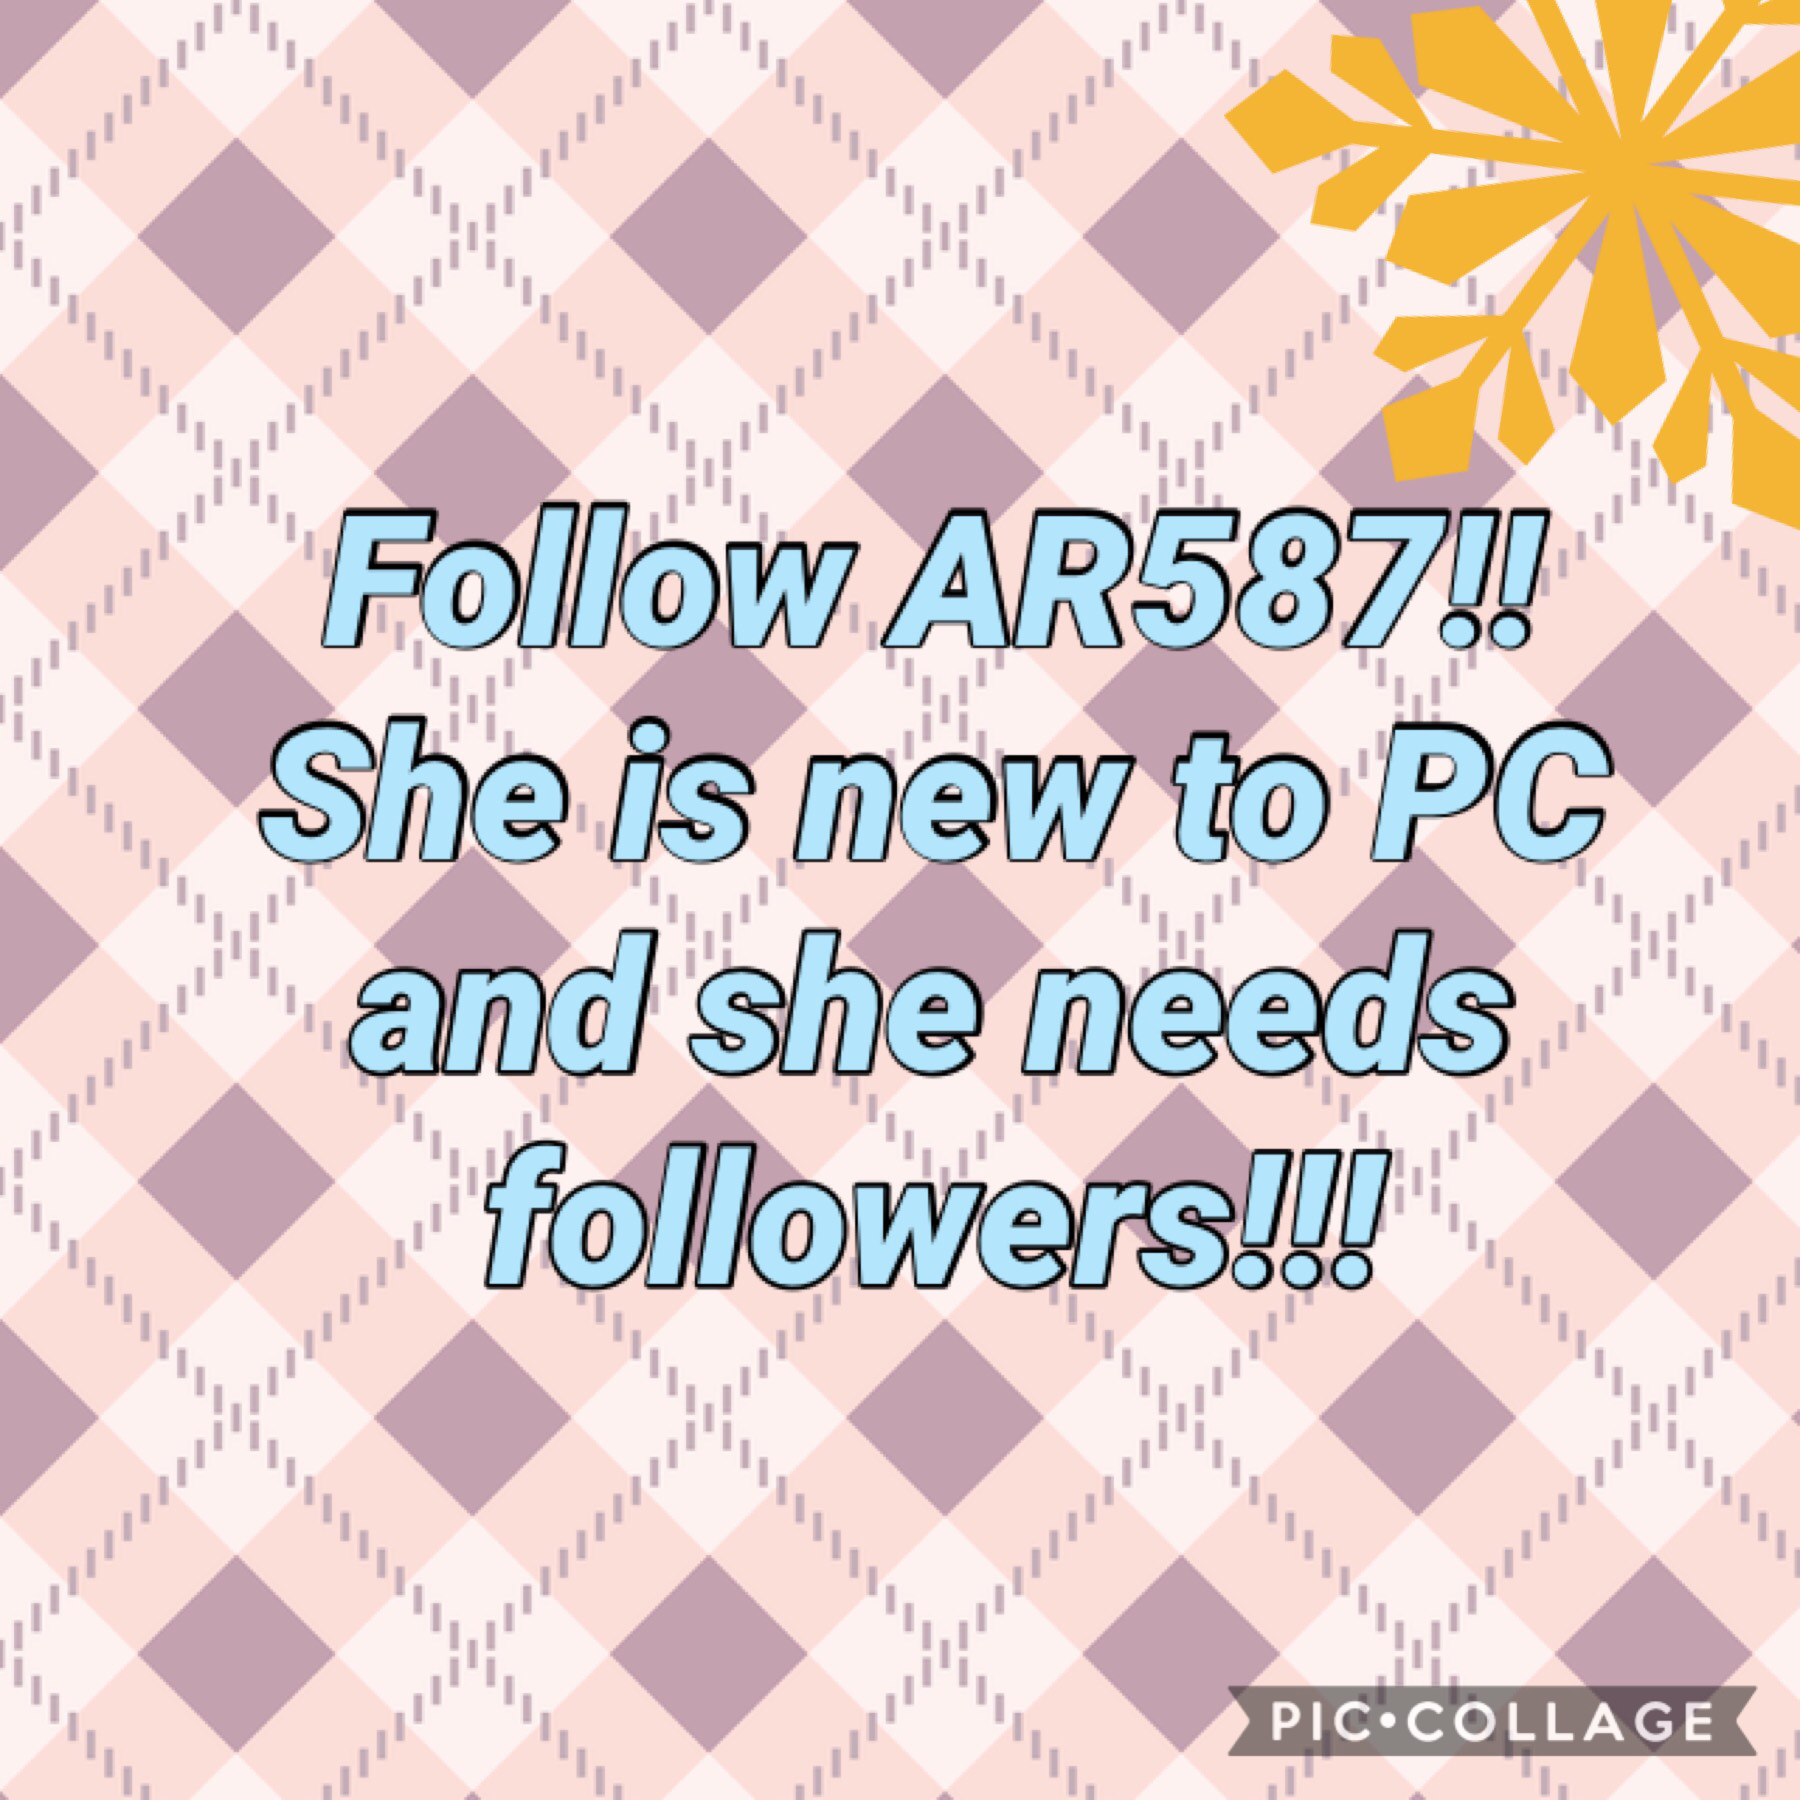 Help AR587 get to 50 followers!!( BTW she is my sister so I am trying to help her😊)